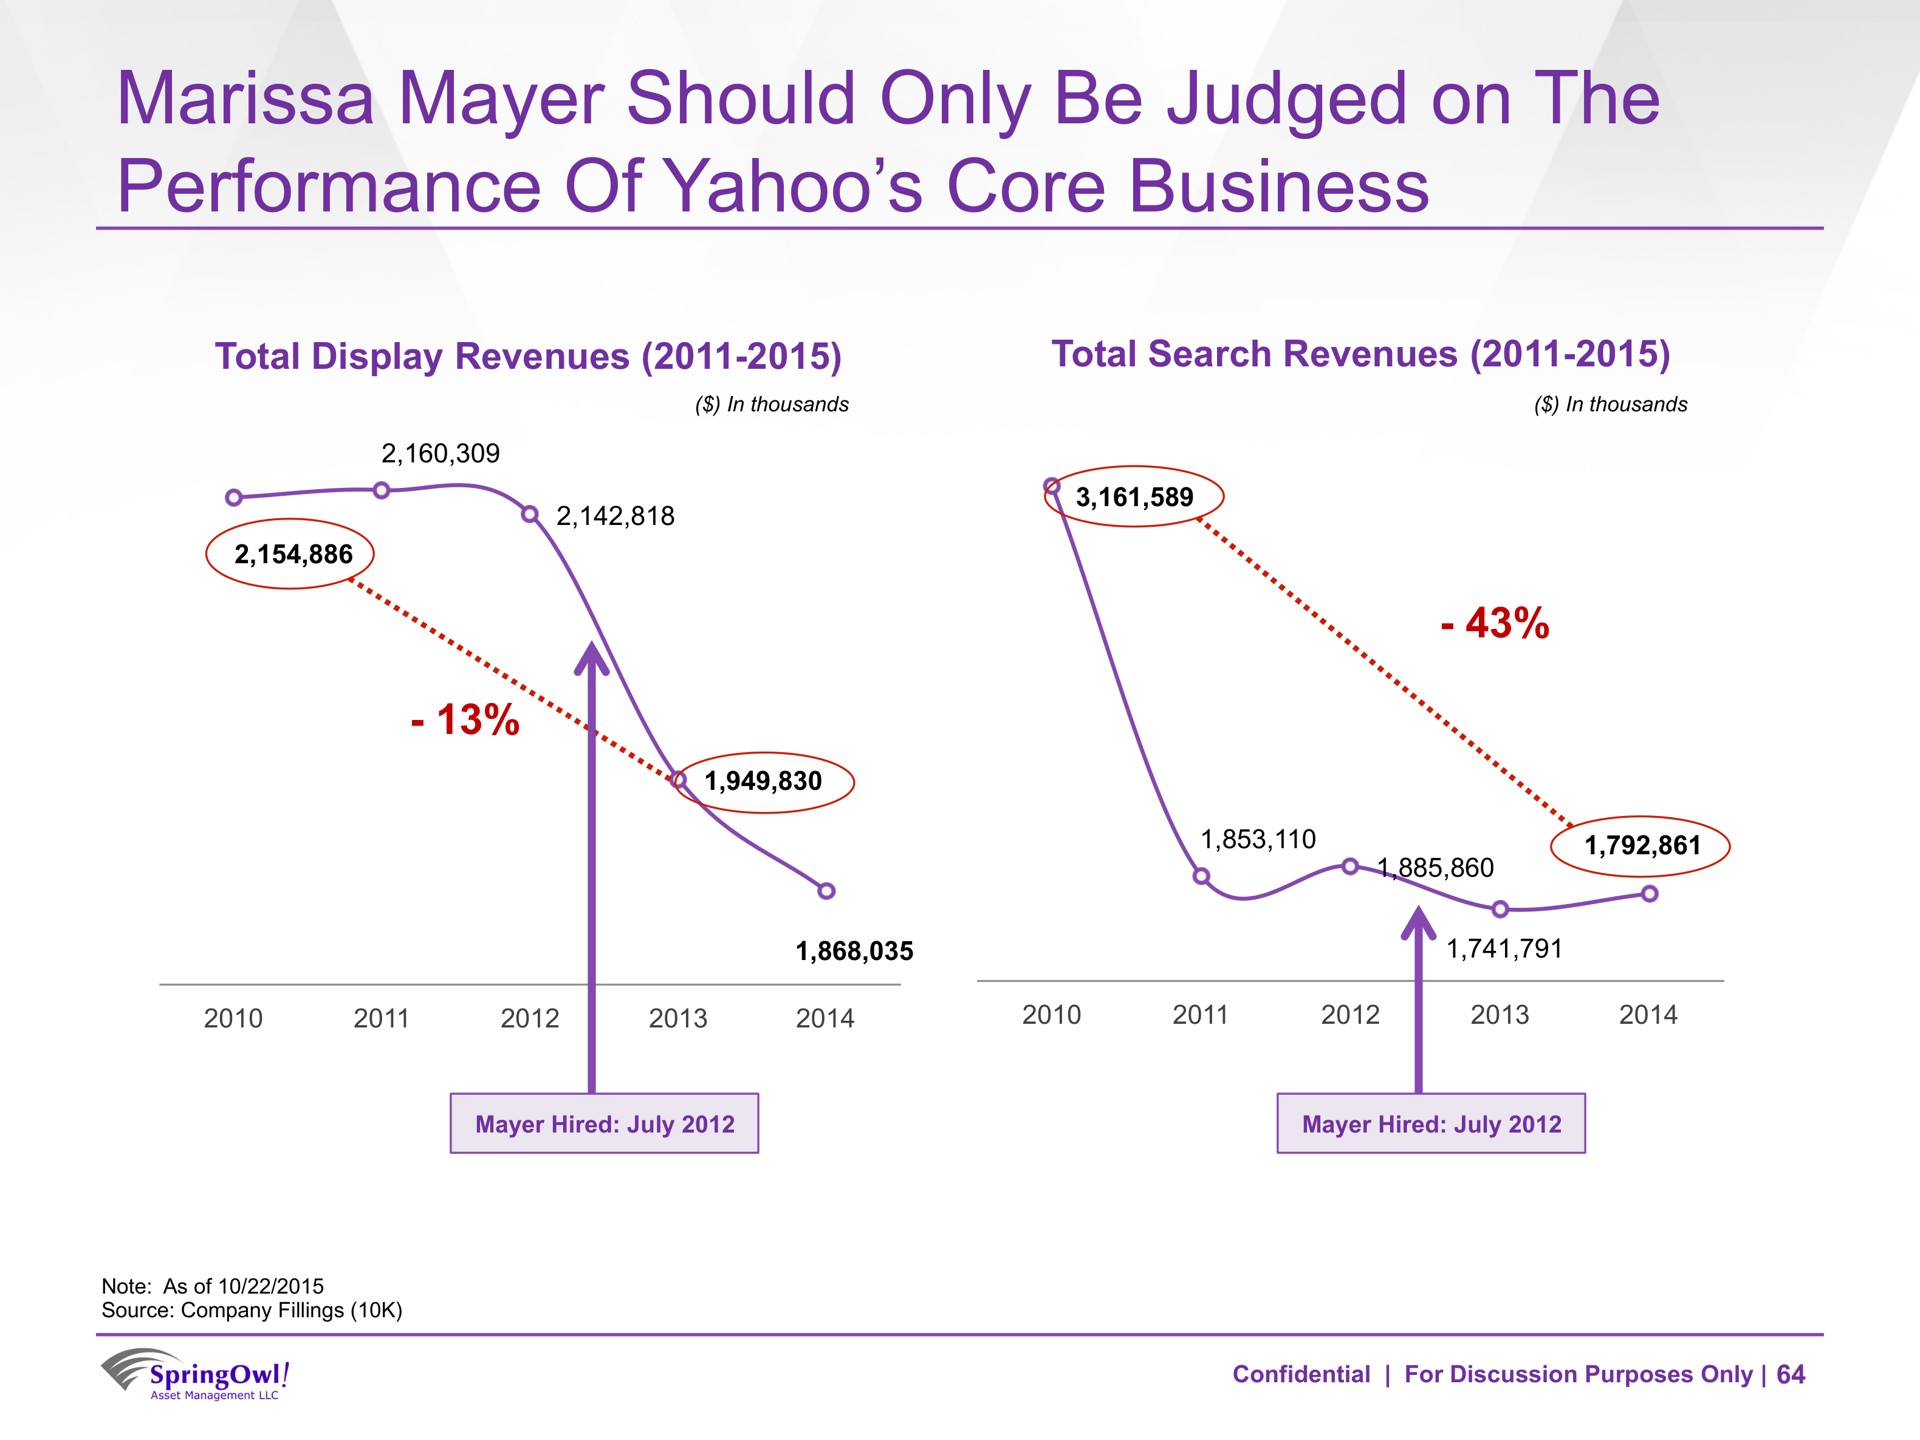 should only be judged on the performance of yahoo core business | SpringOwl